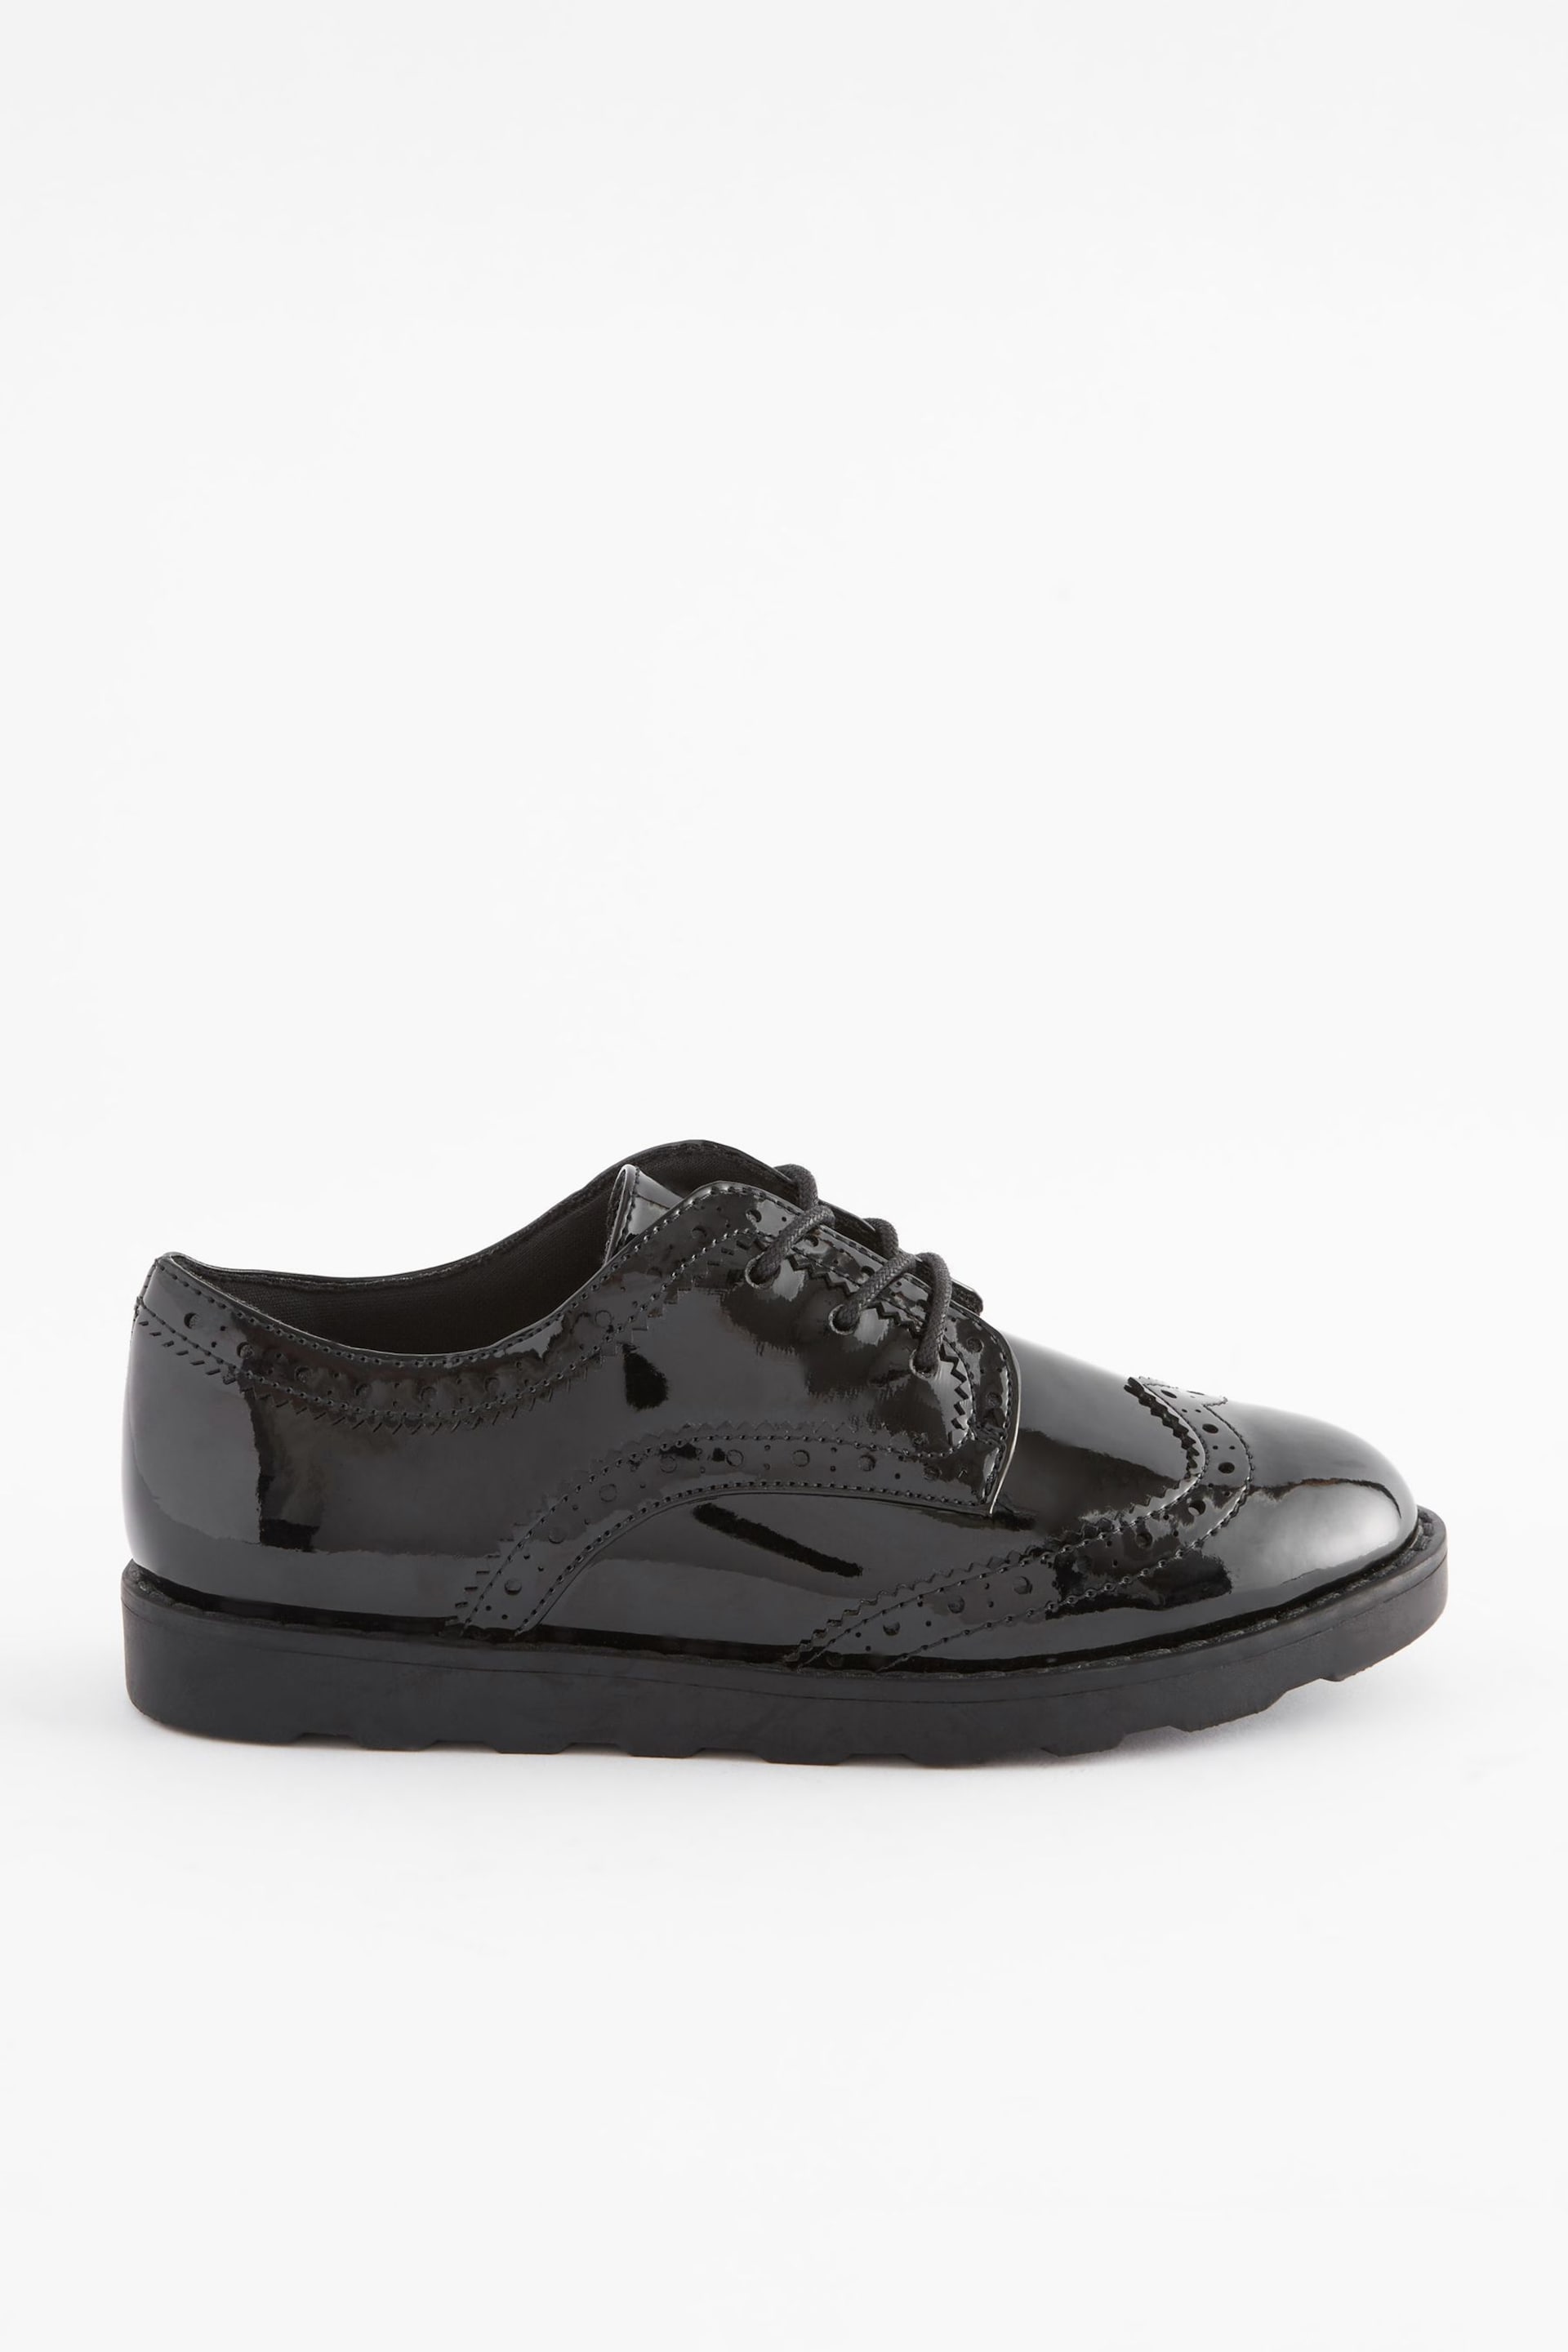 Black Patent Standard Fit (F) School Lace Brogues - Image 2 of 5